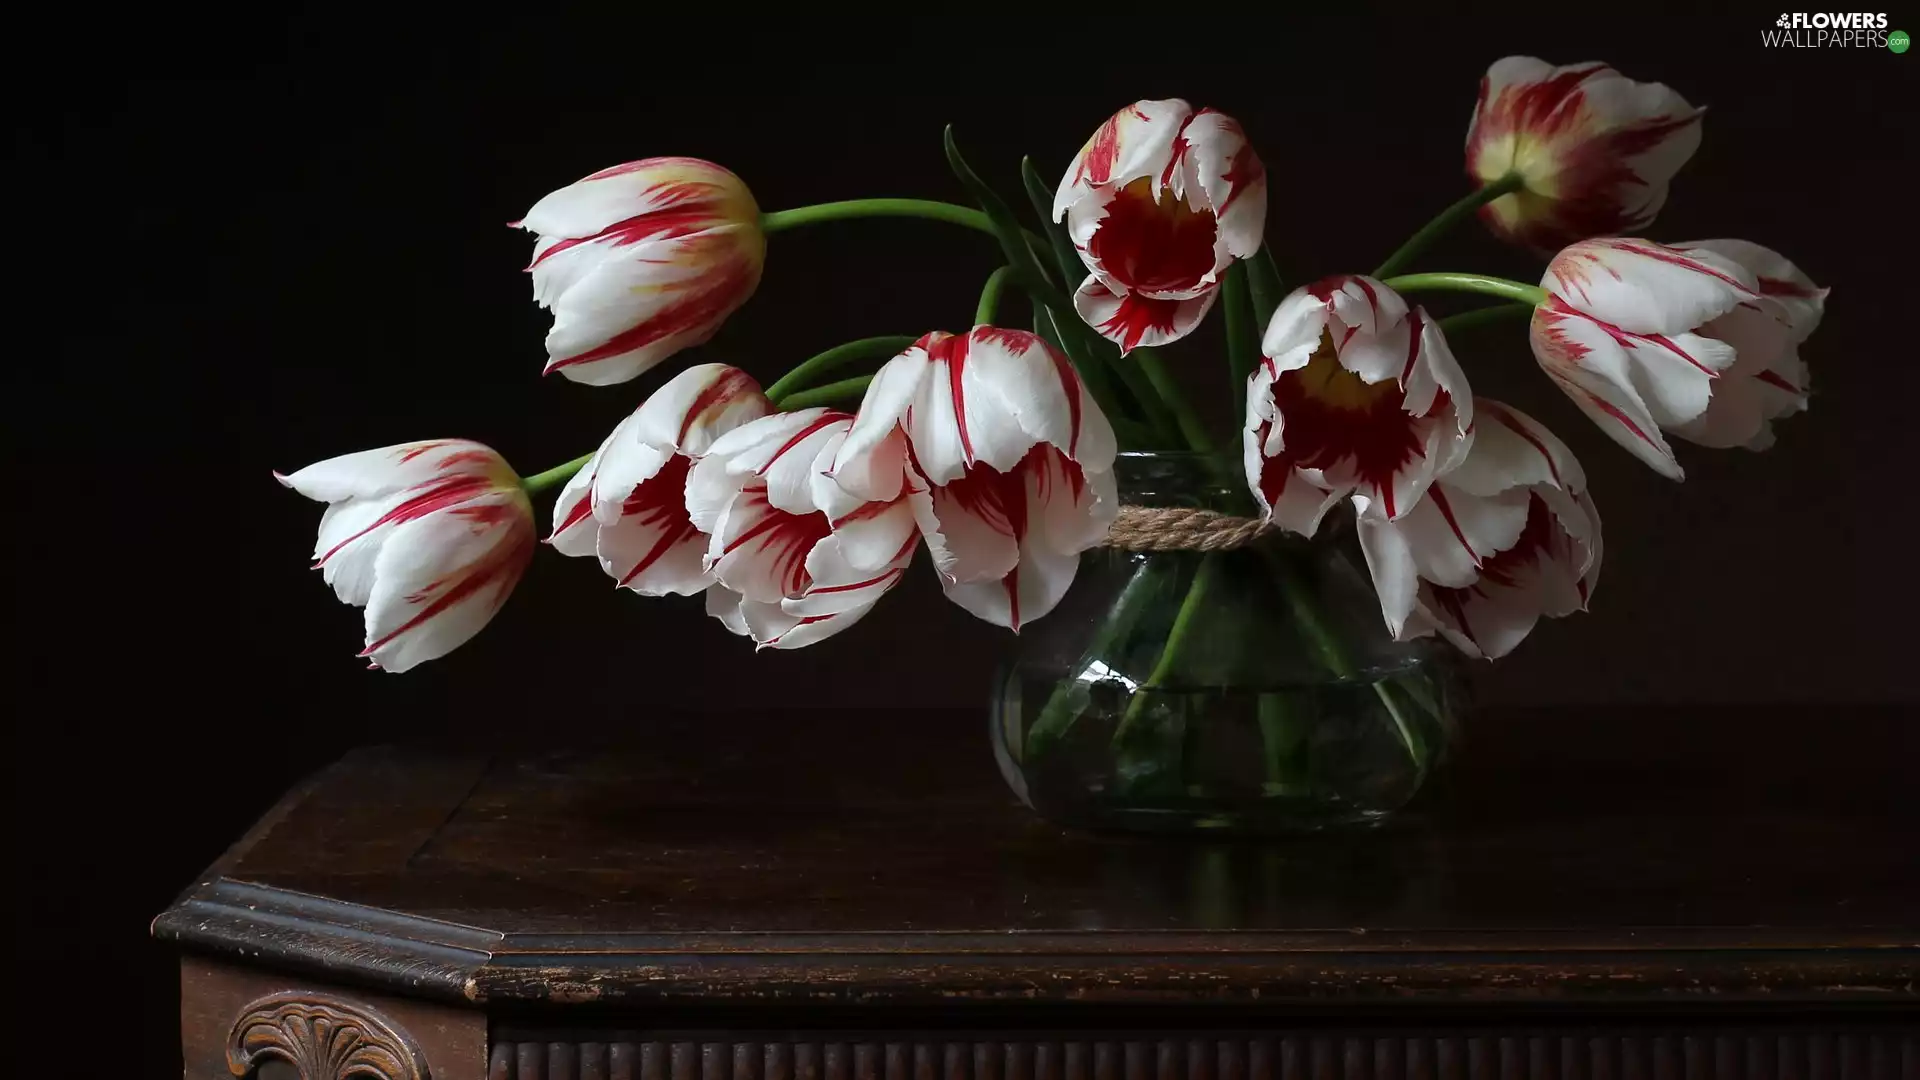 Tulips, Vase, table, White-Red